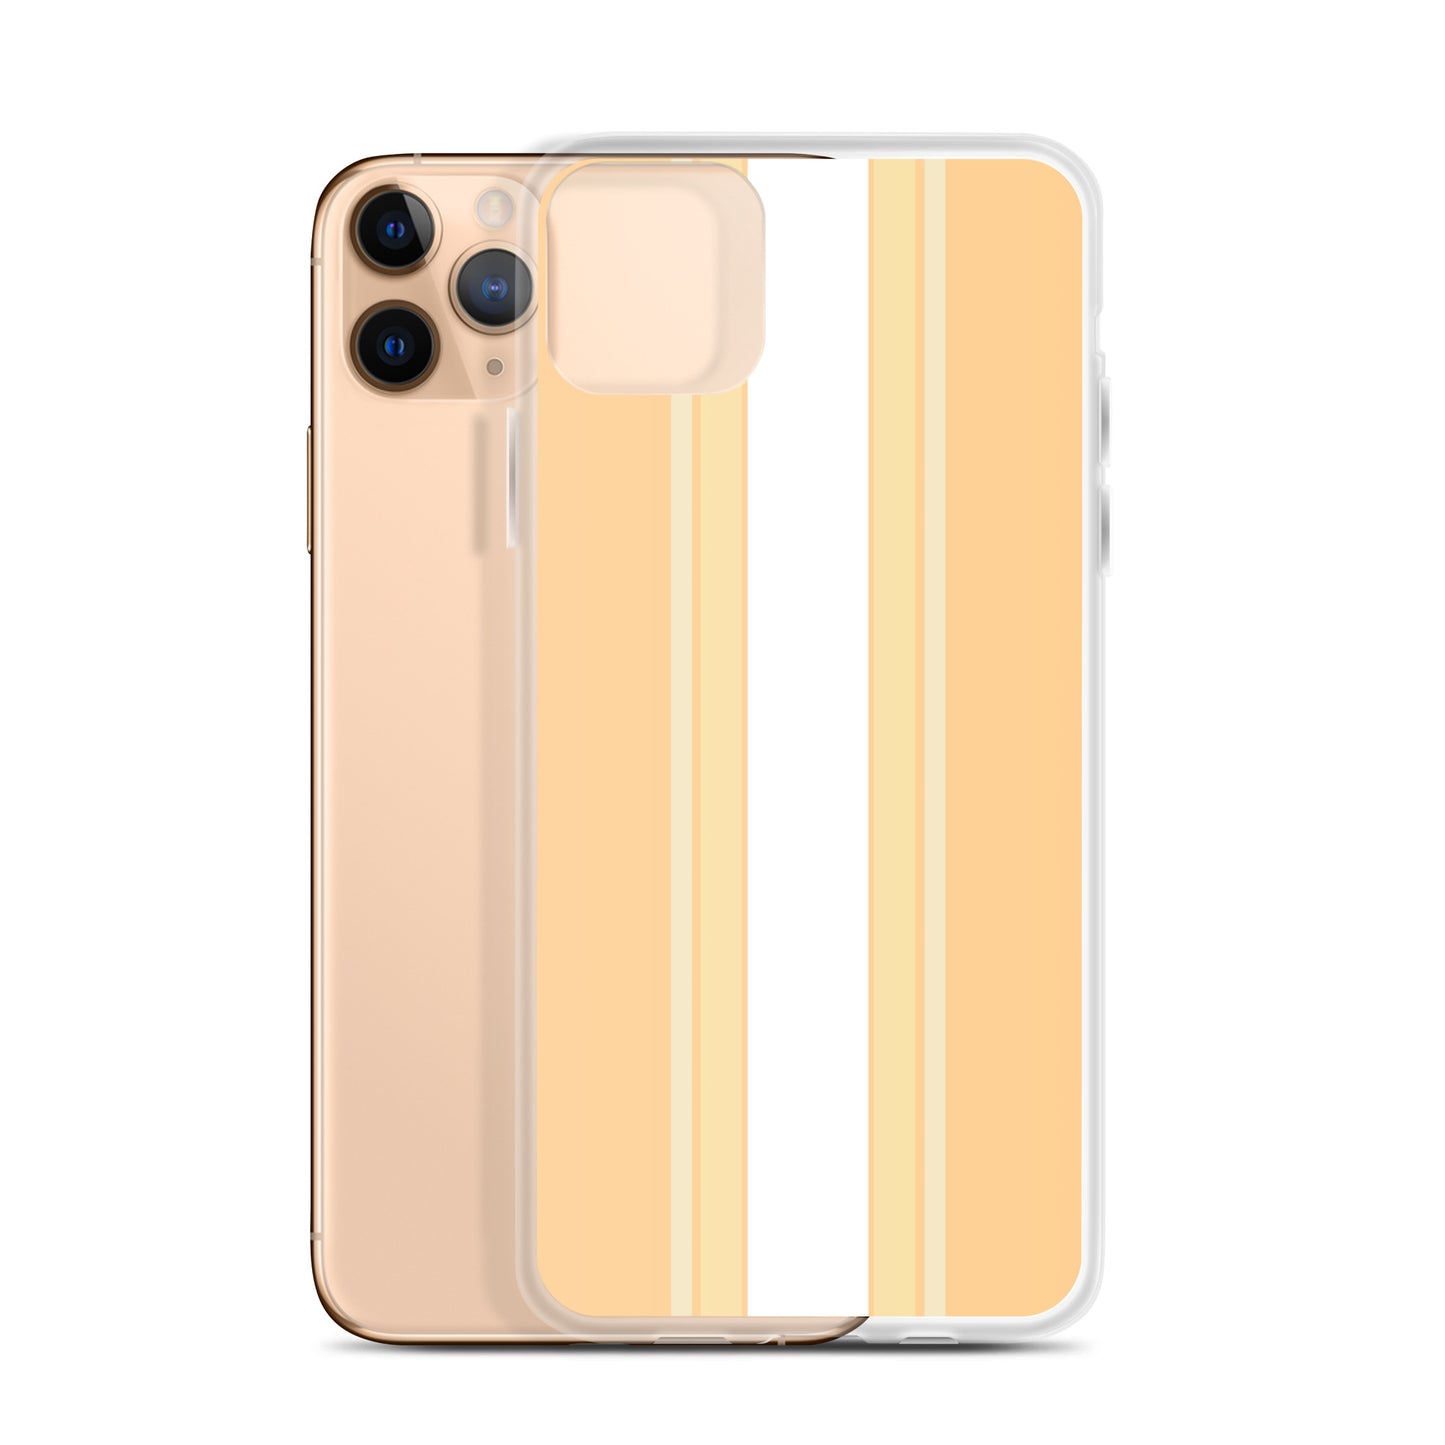 Canary White - Sustainably Made iPhone Case